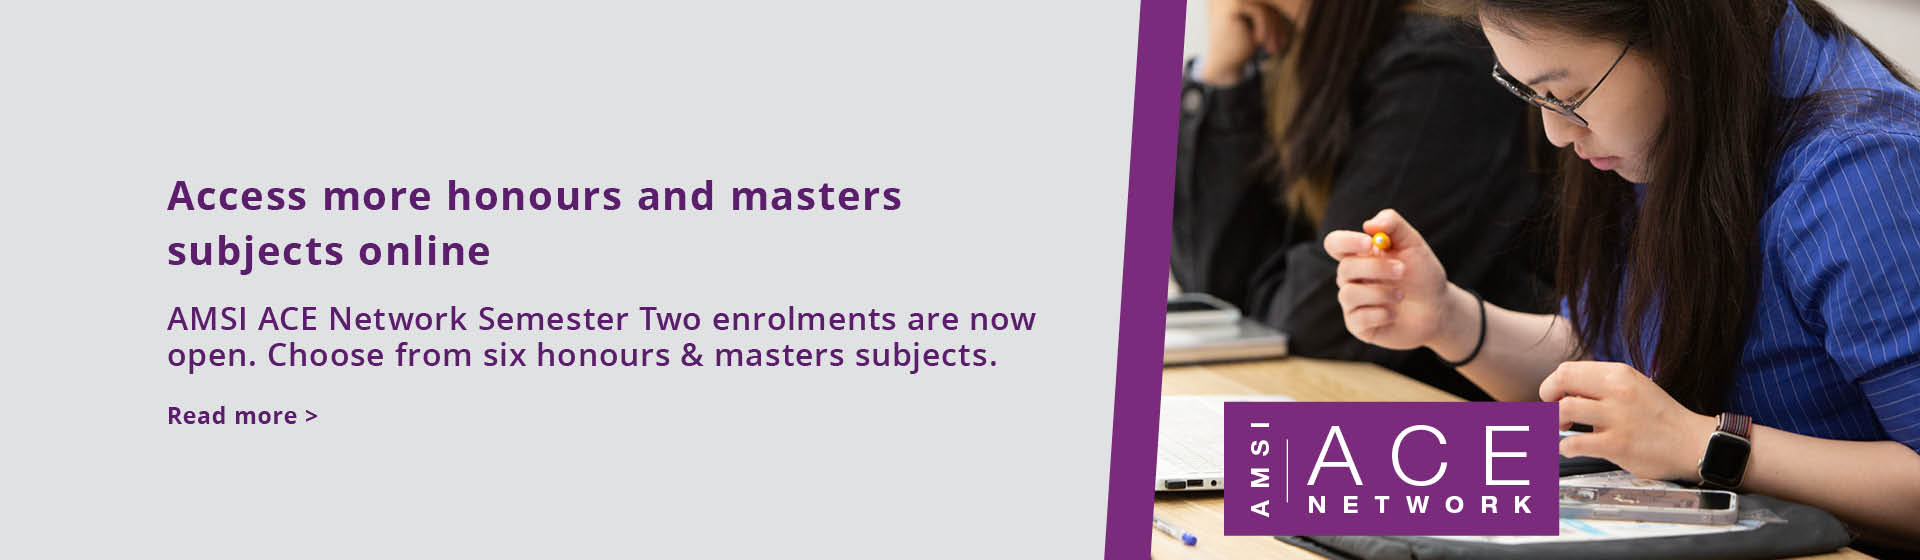 Access more honours and masters subjects online